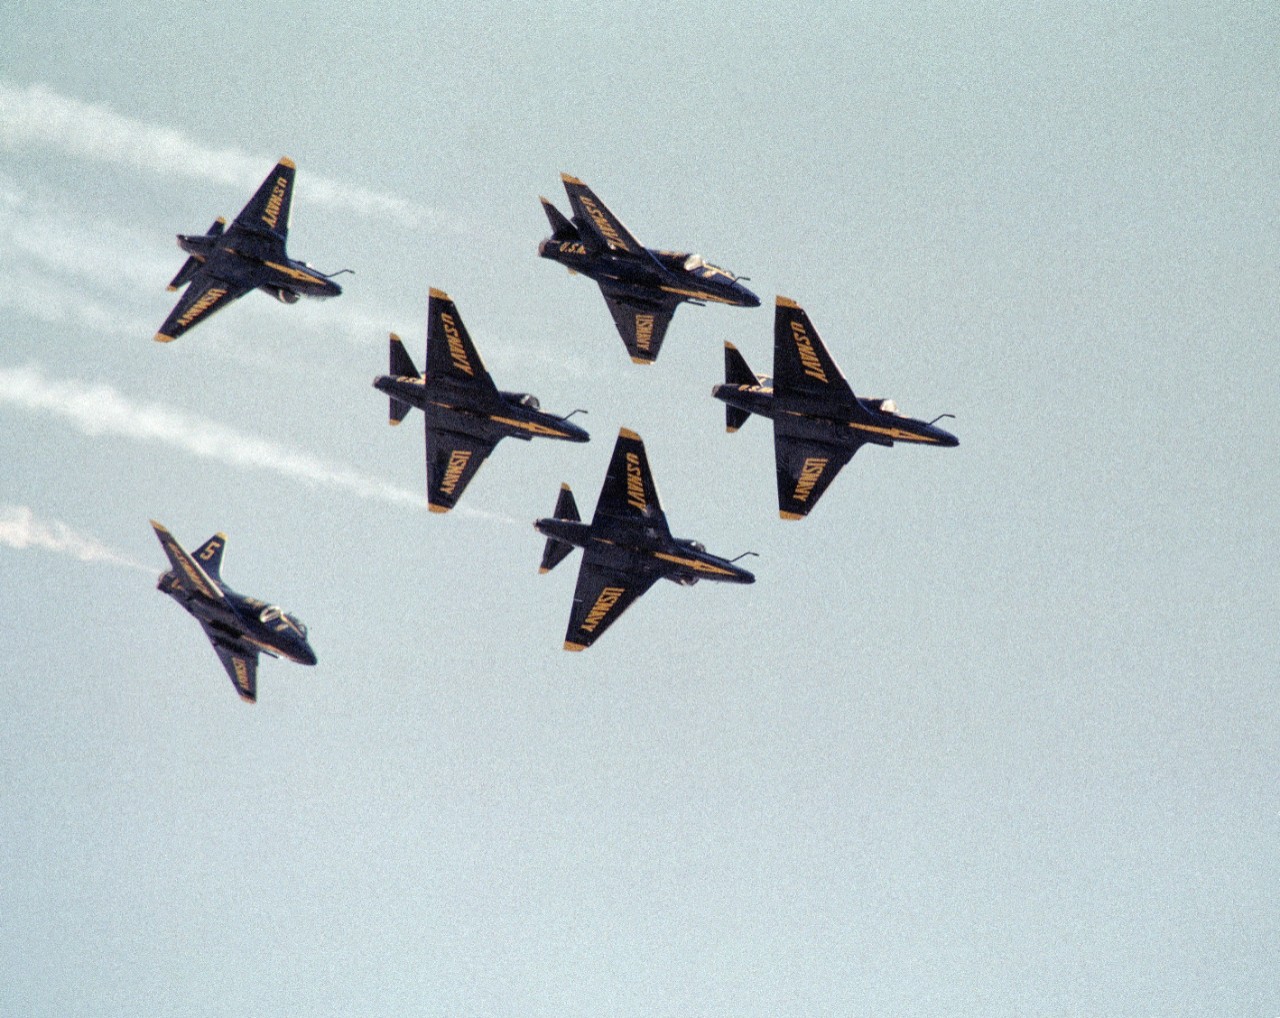 330-CFD-DN-SC-84-09554:  Blue Angels Maneuver:  Delta Head On/Opposing.  A-4F Skyhawk, 1984.   An-air-to-air underside view of A-4F Skyhawk aircraft performing the beginning of a Delta Head On/Opposing Maneuver.   Photographed by PH2 Paul O’Mara.  Official U.S. Navy Photograph.